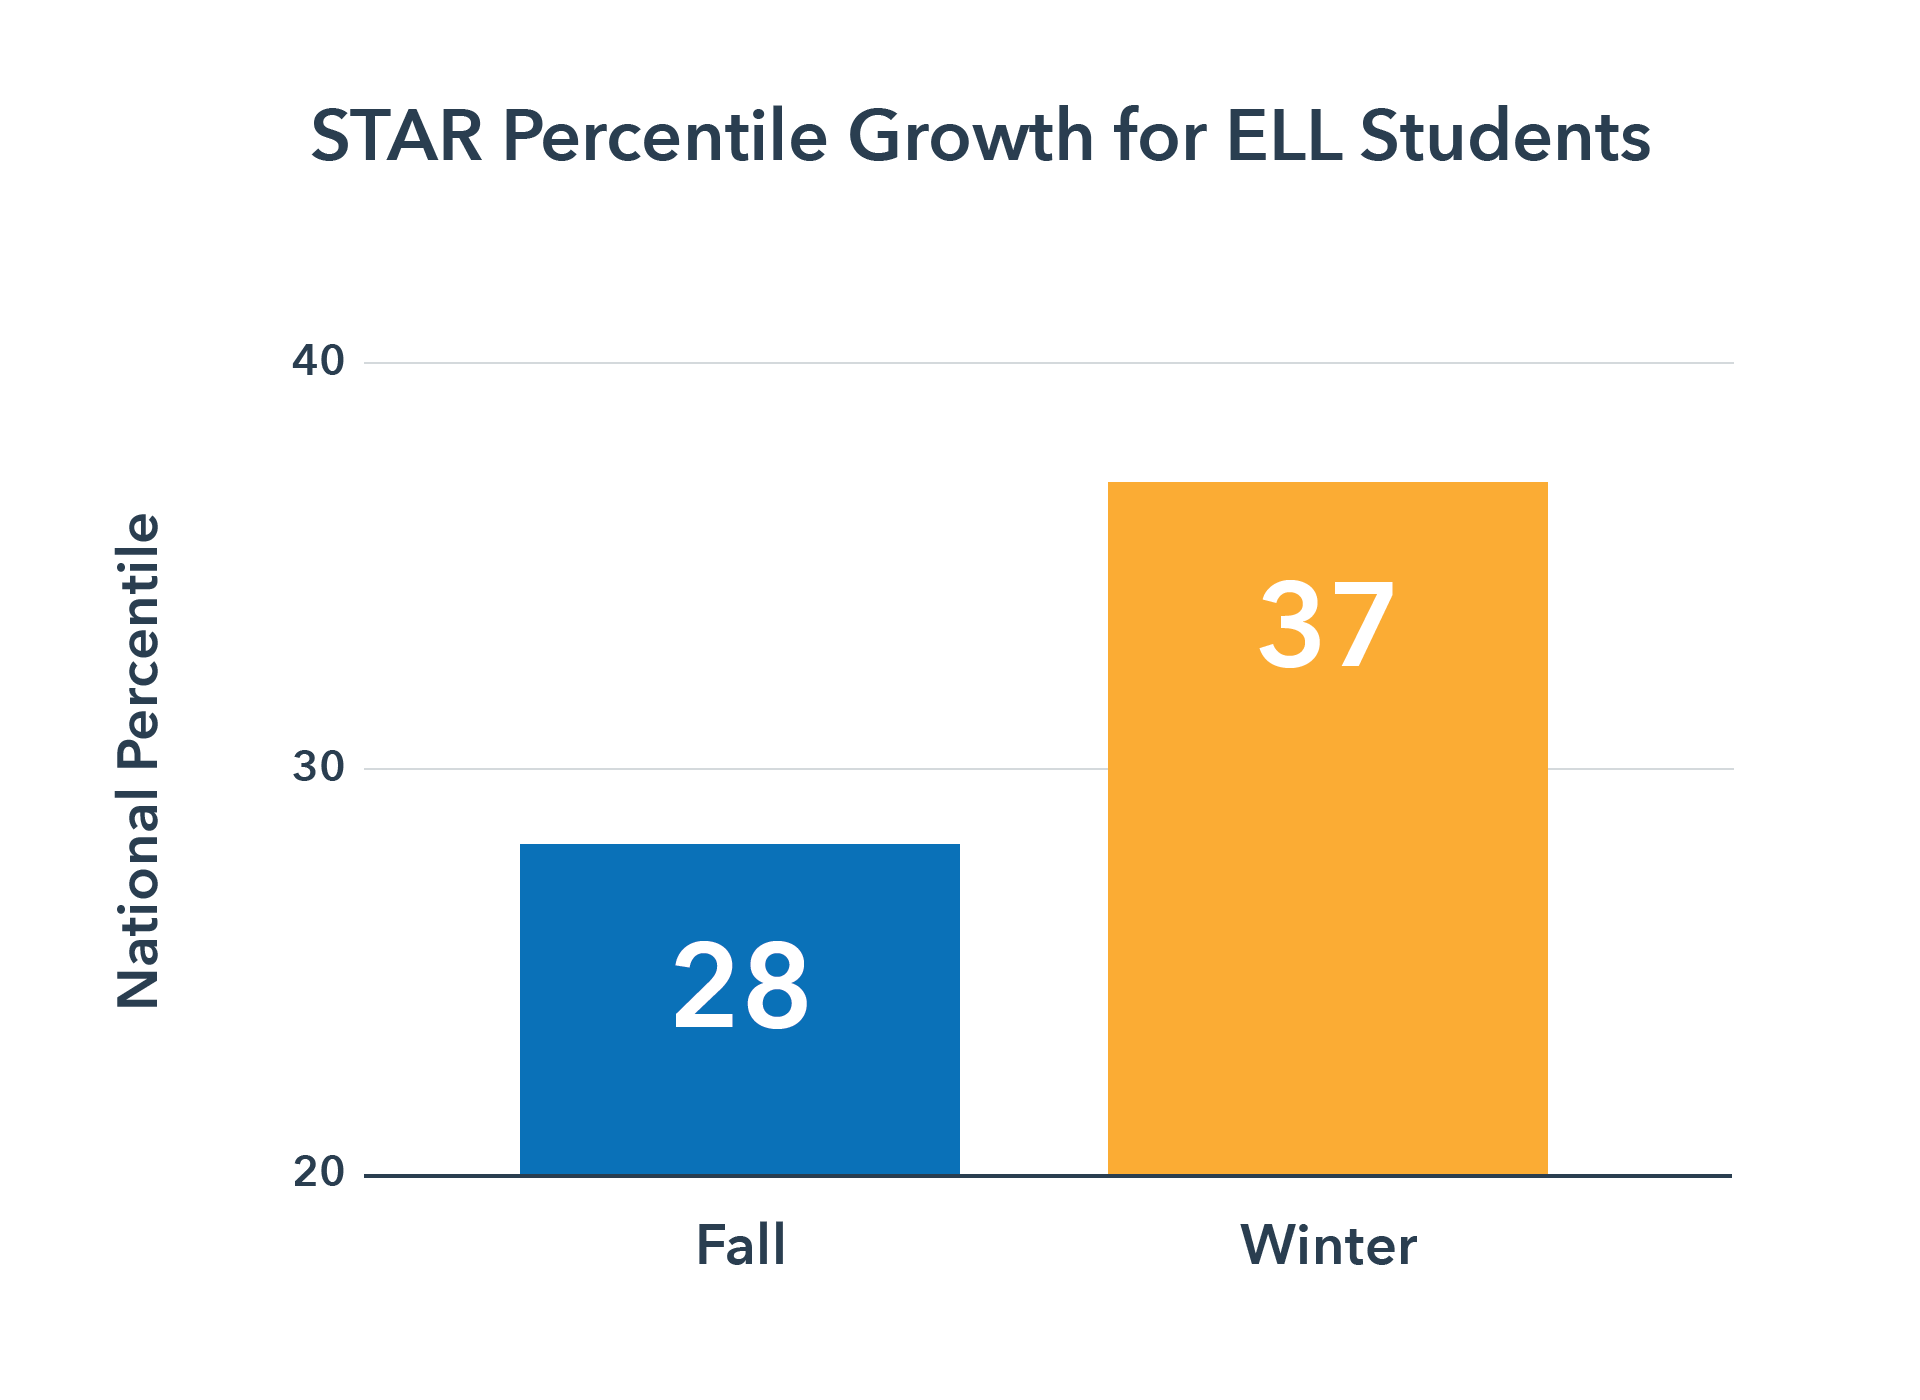 STAR Percentile Growth for English Language Learners